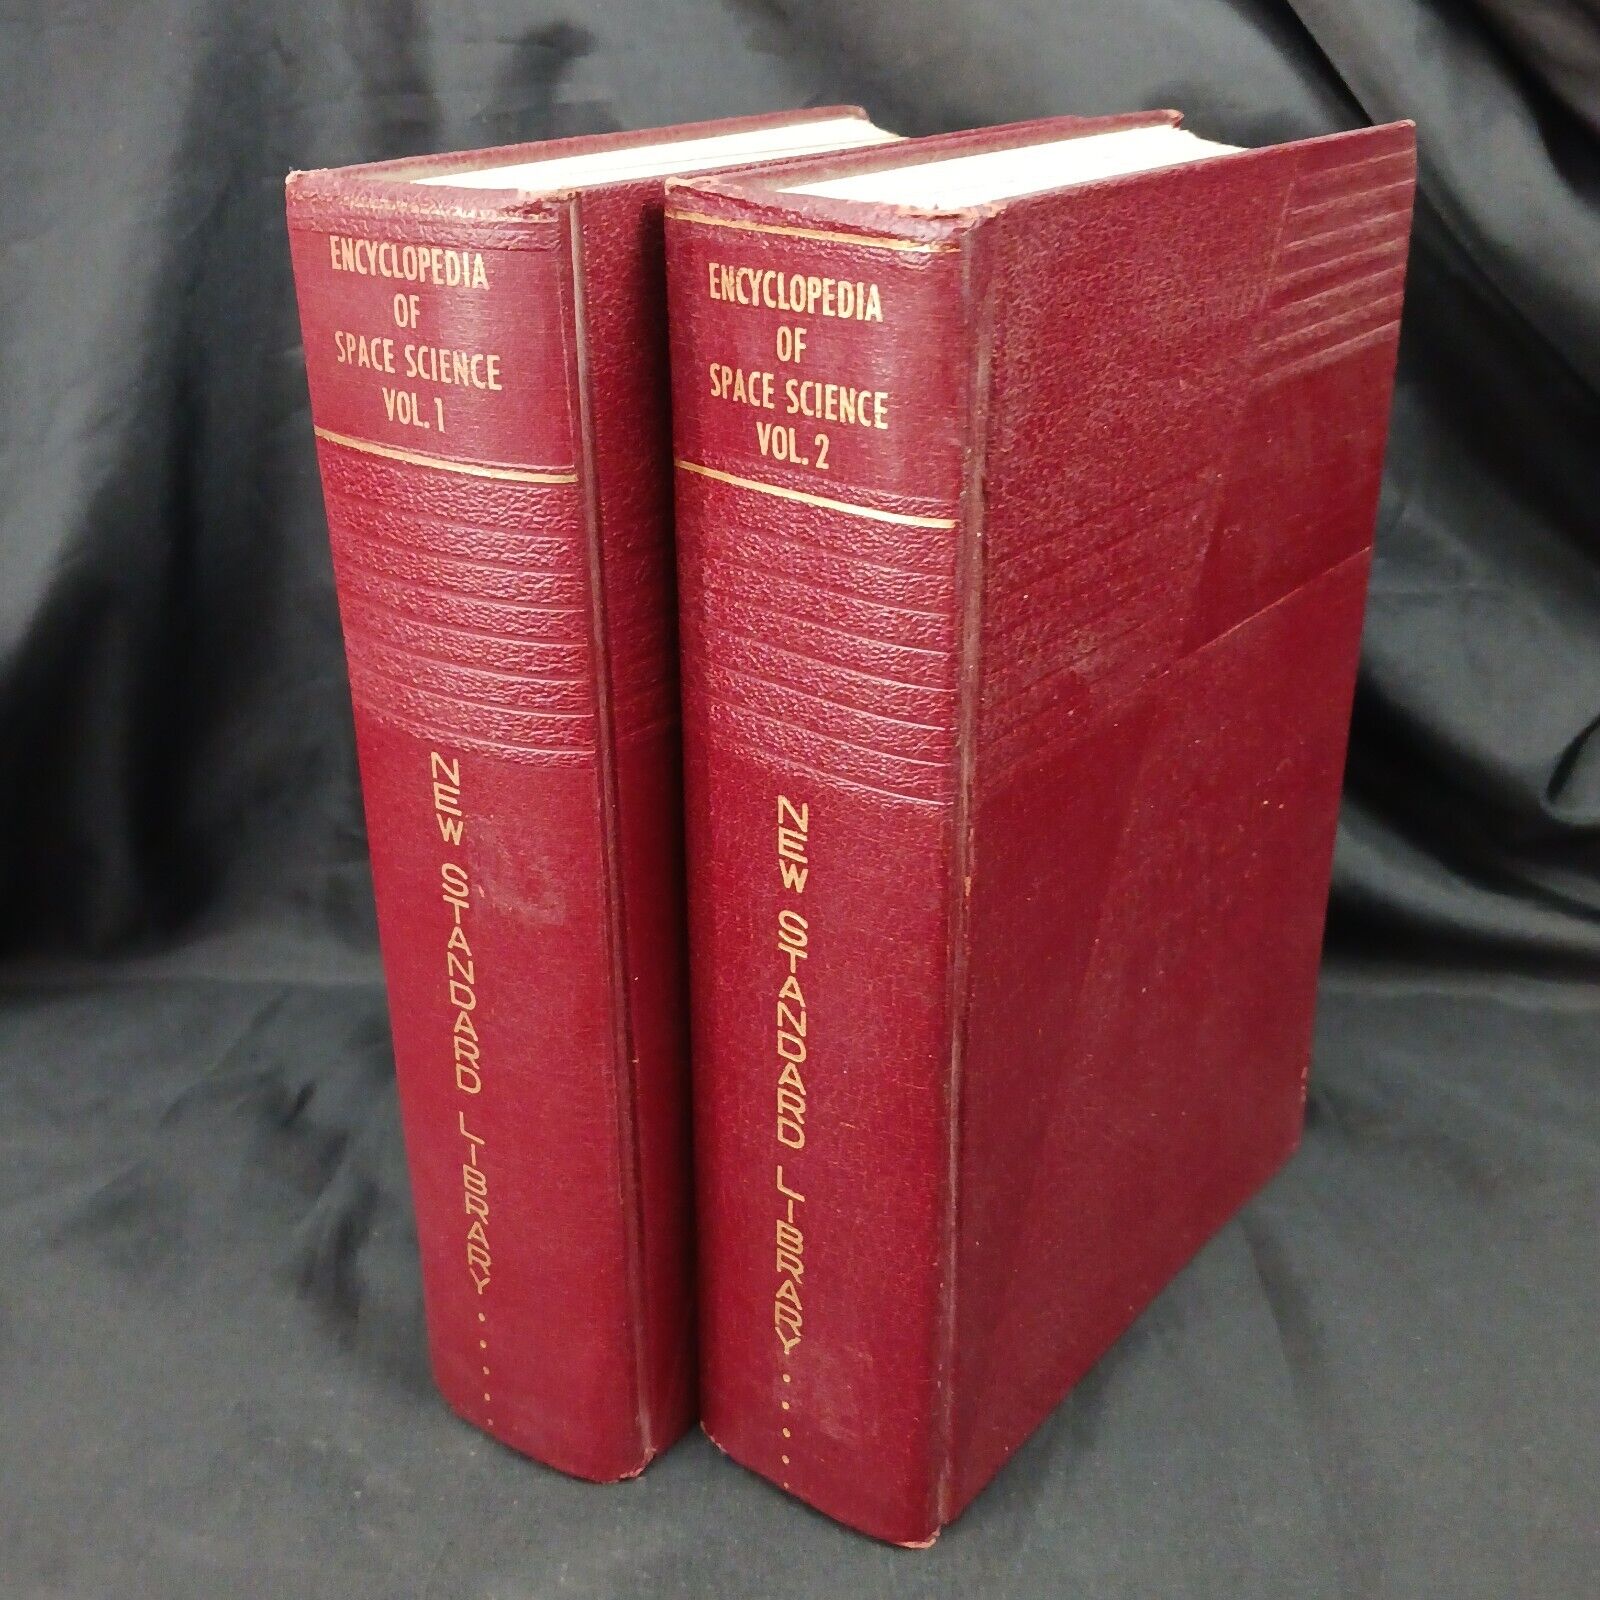 ENCYCLOPEDIA OF SPACE SCIENCE New Standard Library 1963 Illustrated Vol 1 & 2